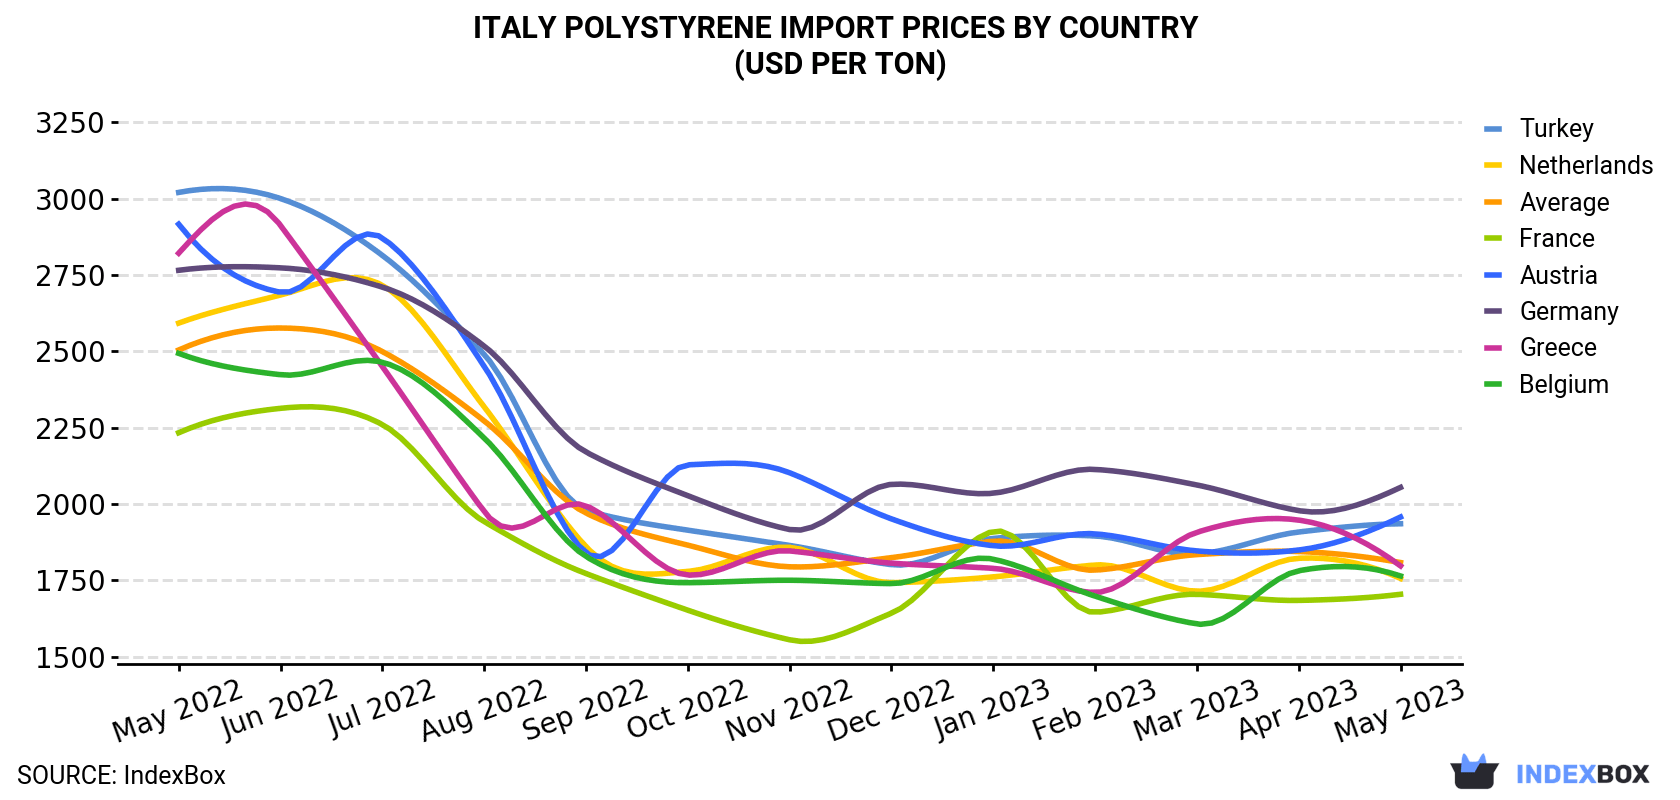 Italy Polystyrene Import Prices By Country (USD Per Ton)